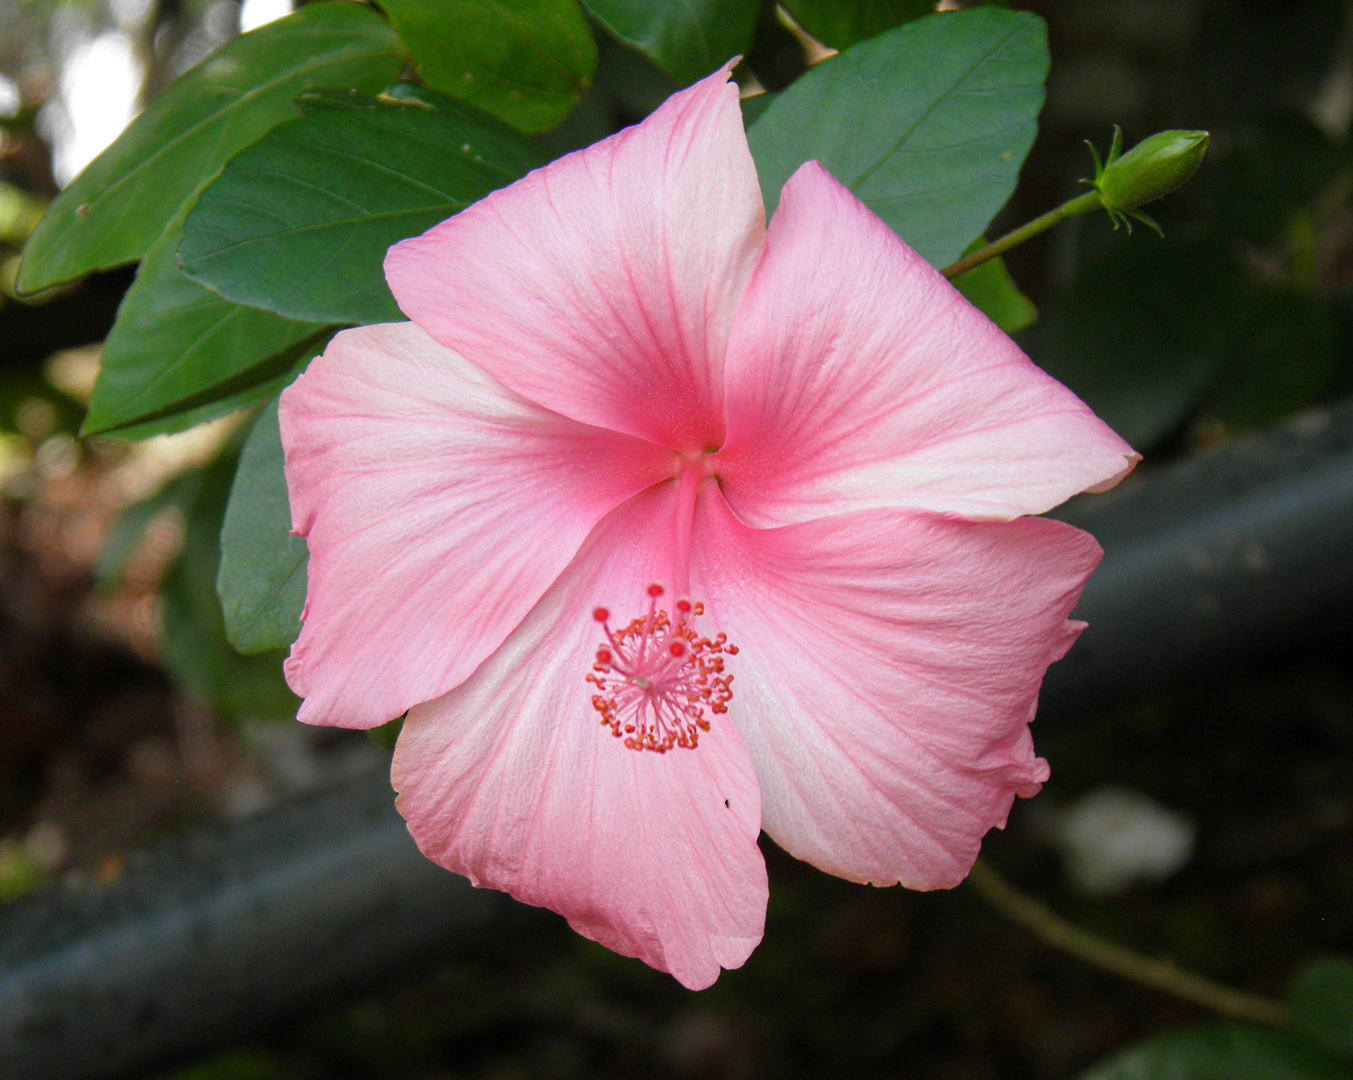 THE HIBISCUS WITH ITS WHORLS